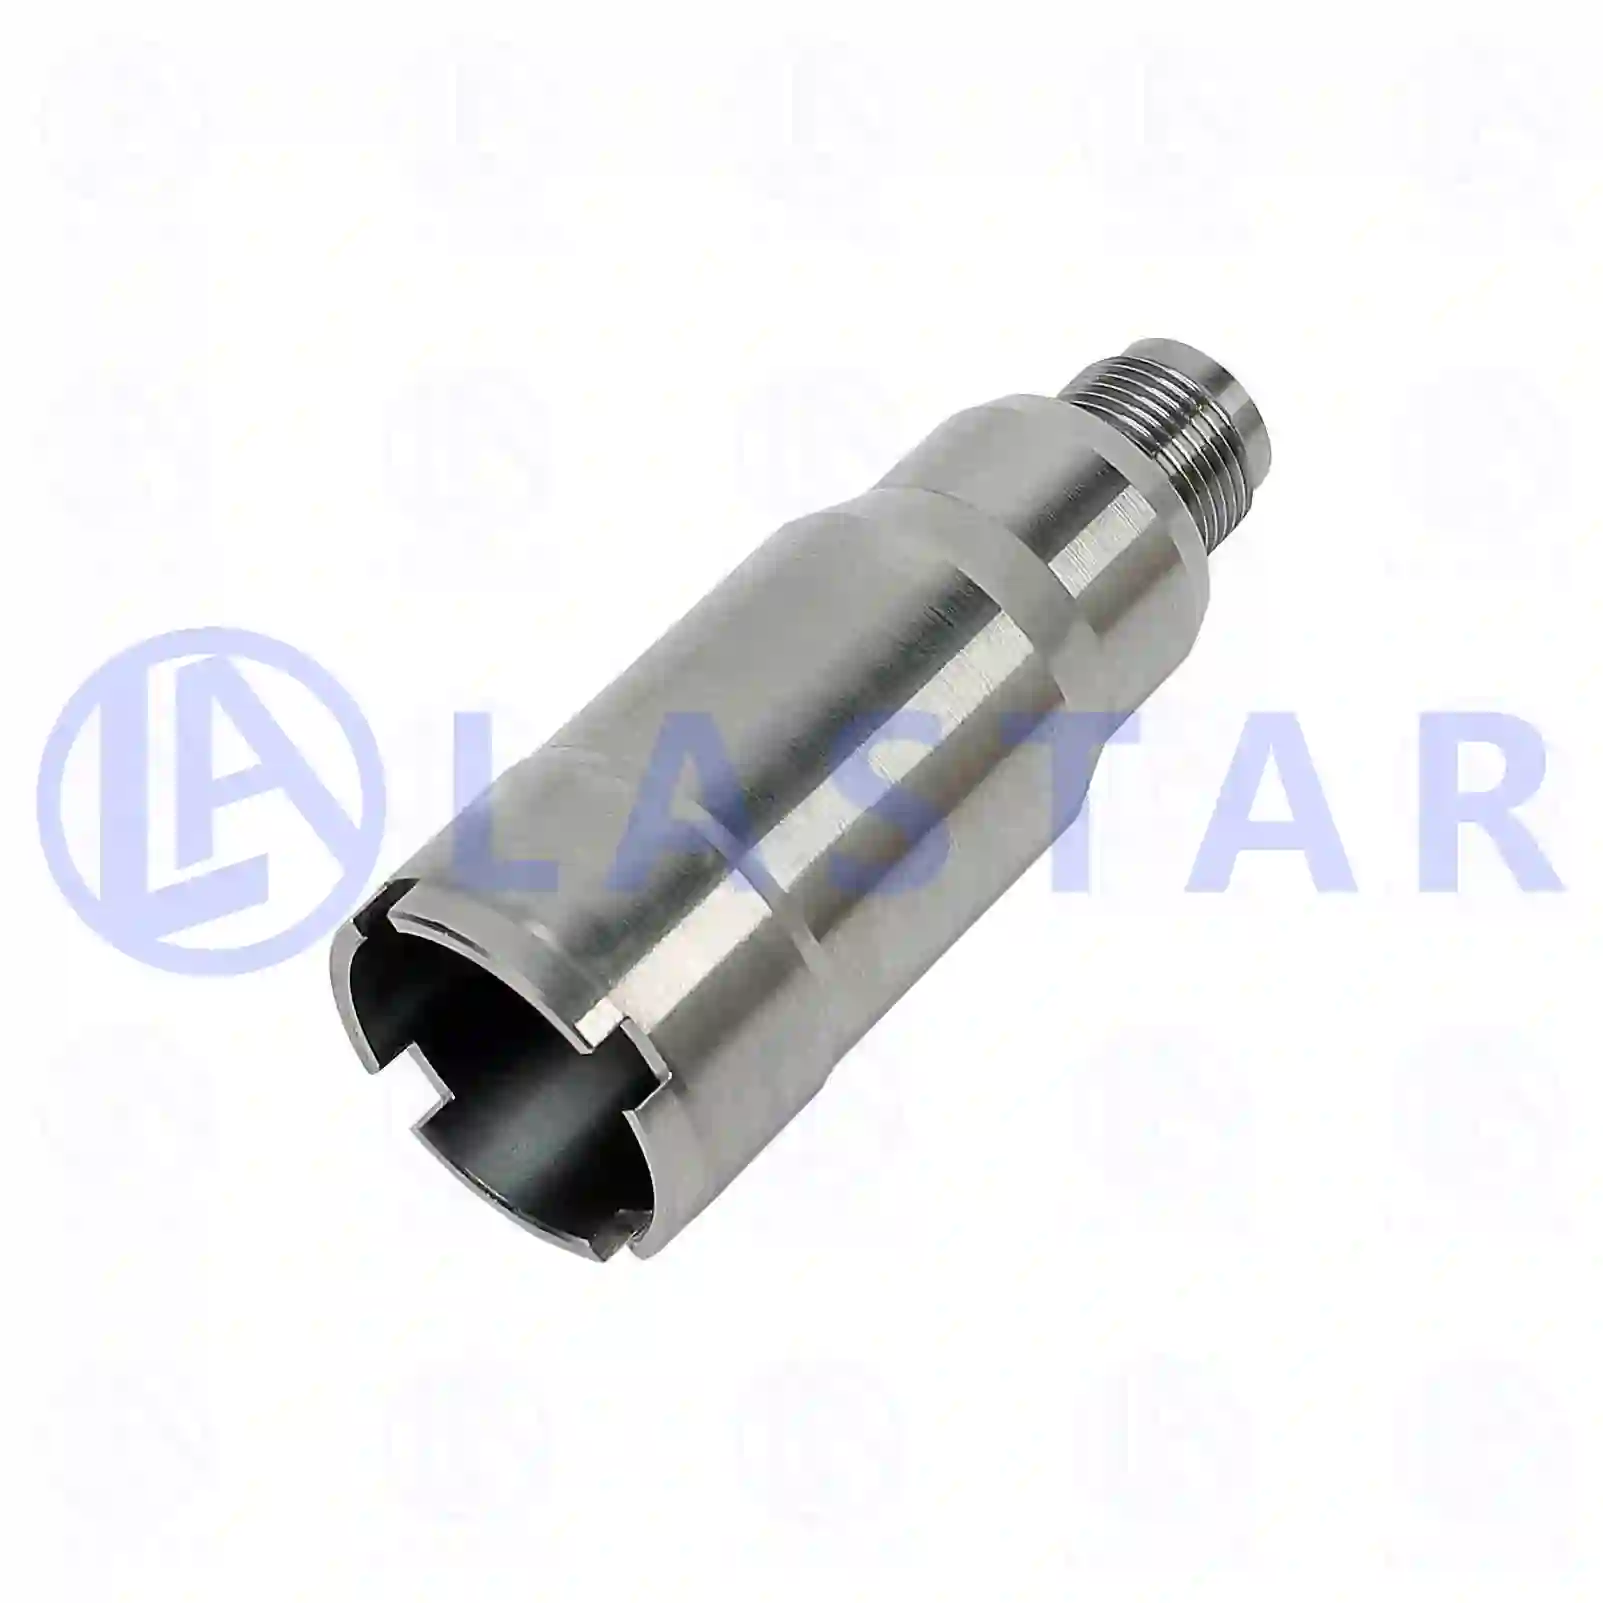 Injection sleeve, 77701625, 9060170488, 9060170488, ZG10467-0008 ||  77701625 Lastar Spare Part | Truck Spare Parts, Auotomotive Spare Parts Injection sleeve, 77701625, 9060170488, 9060170488, ZG10467-0008 ||  77701625 Lastar Spare Part | Truck Spare Parts, Auotomotive Spare Parts